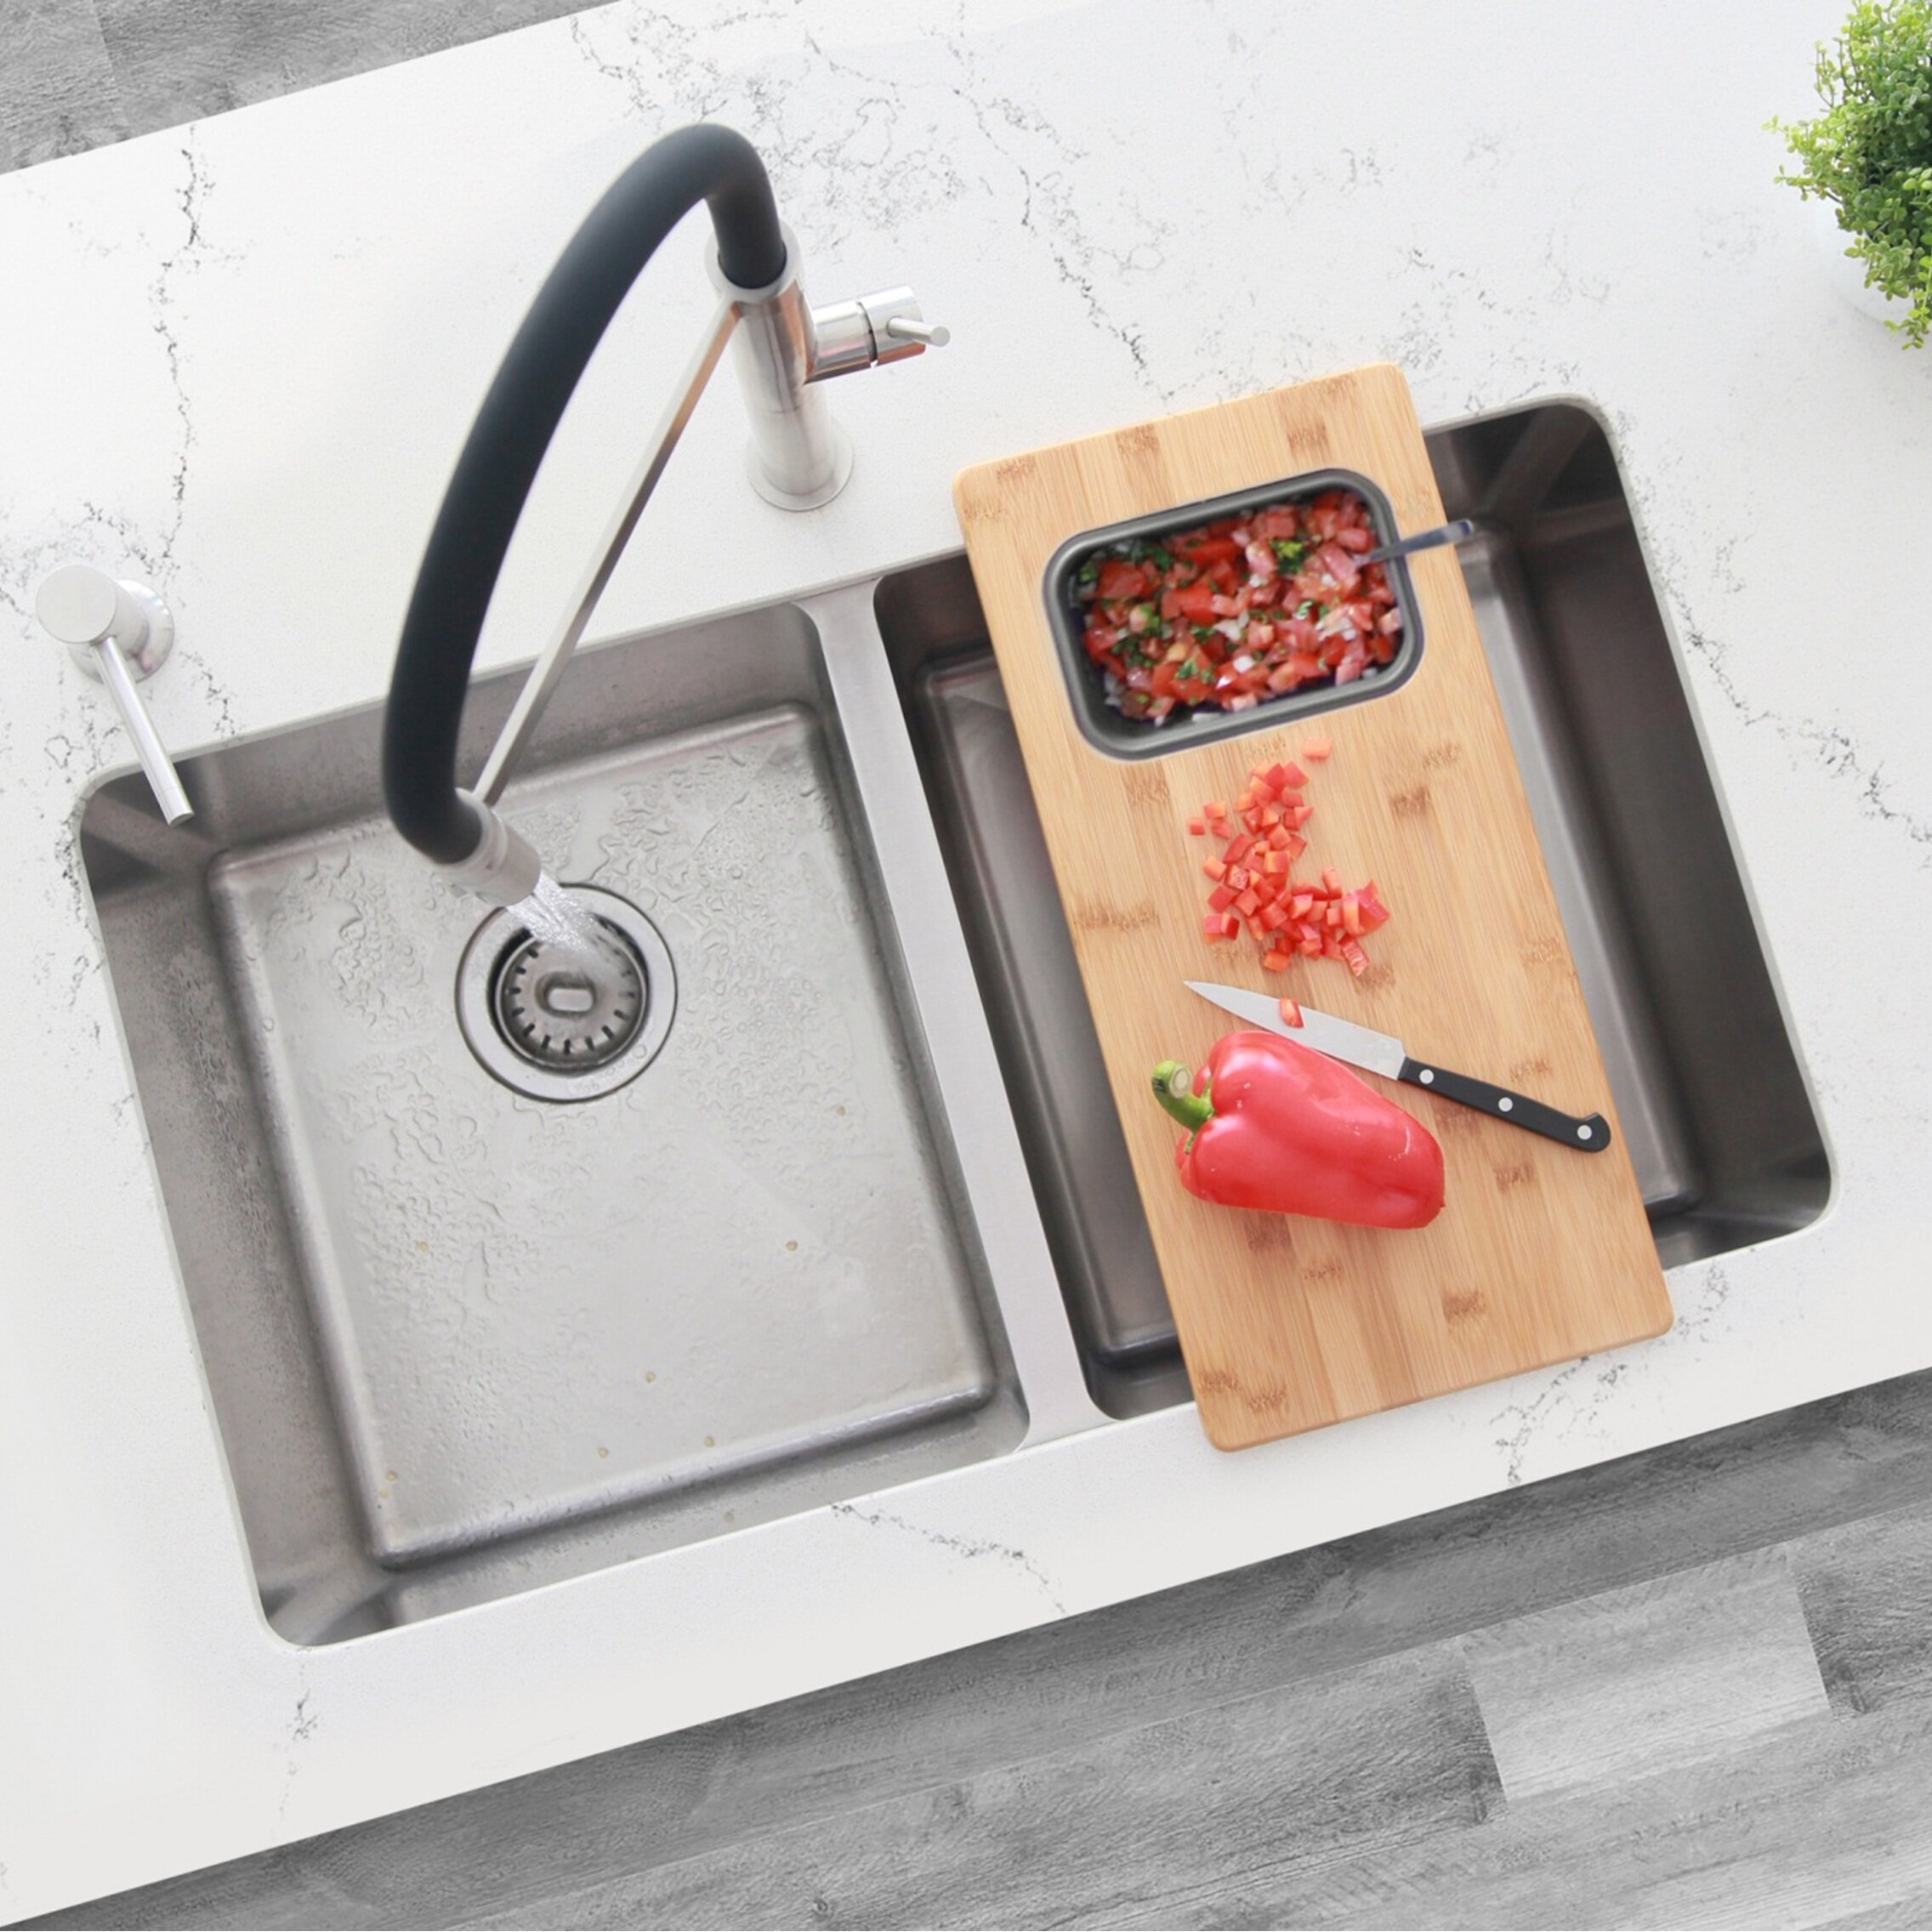 Zwilling J.A. Henckels Cutting Board with Silicone Trivet Pot